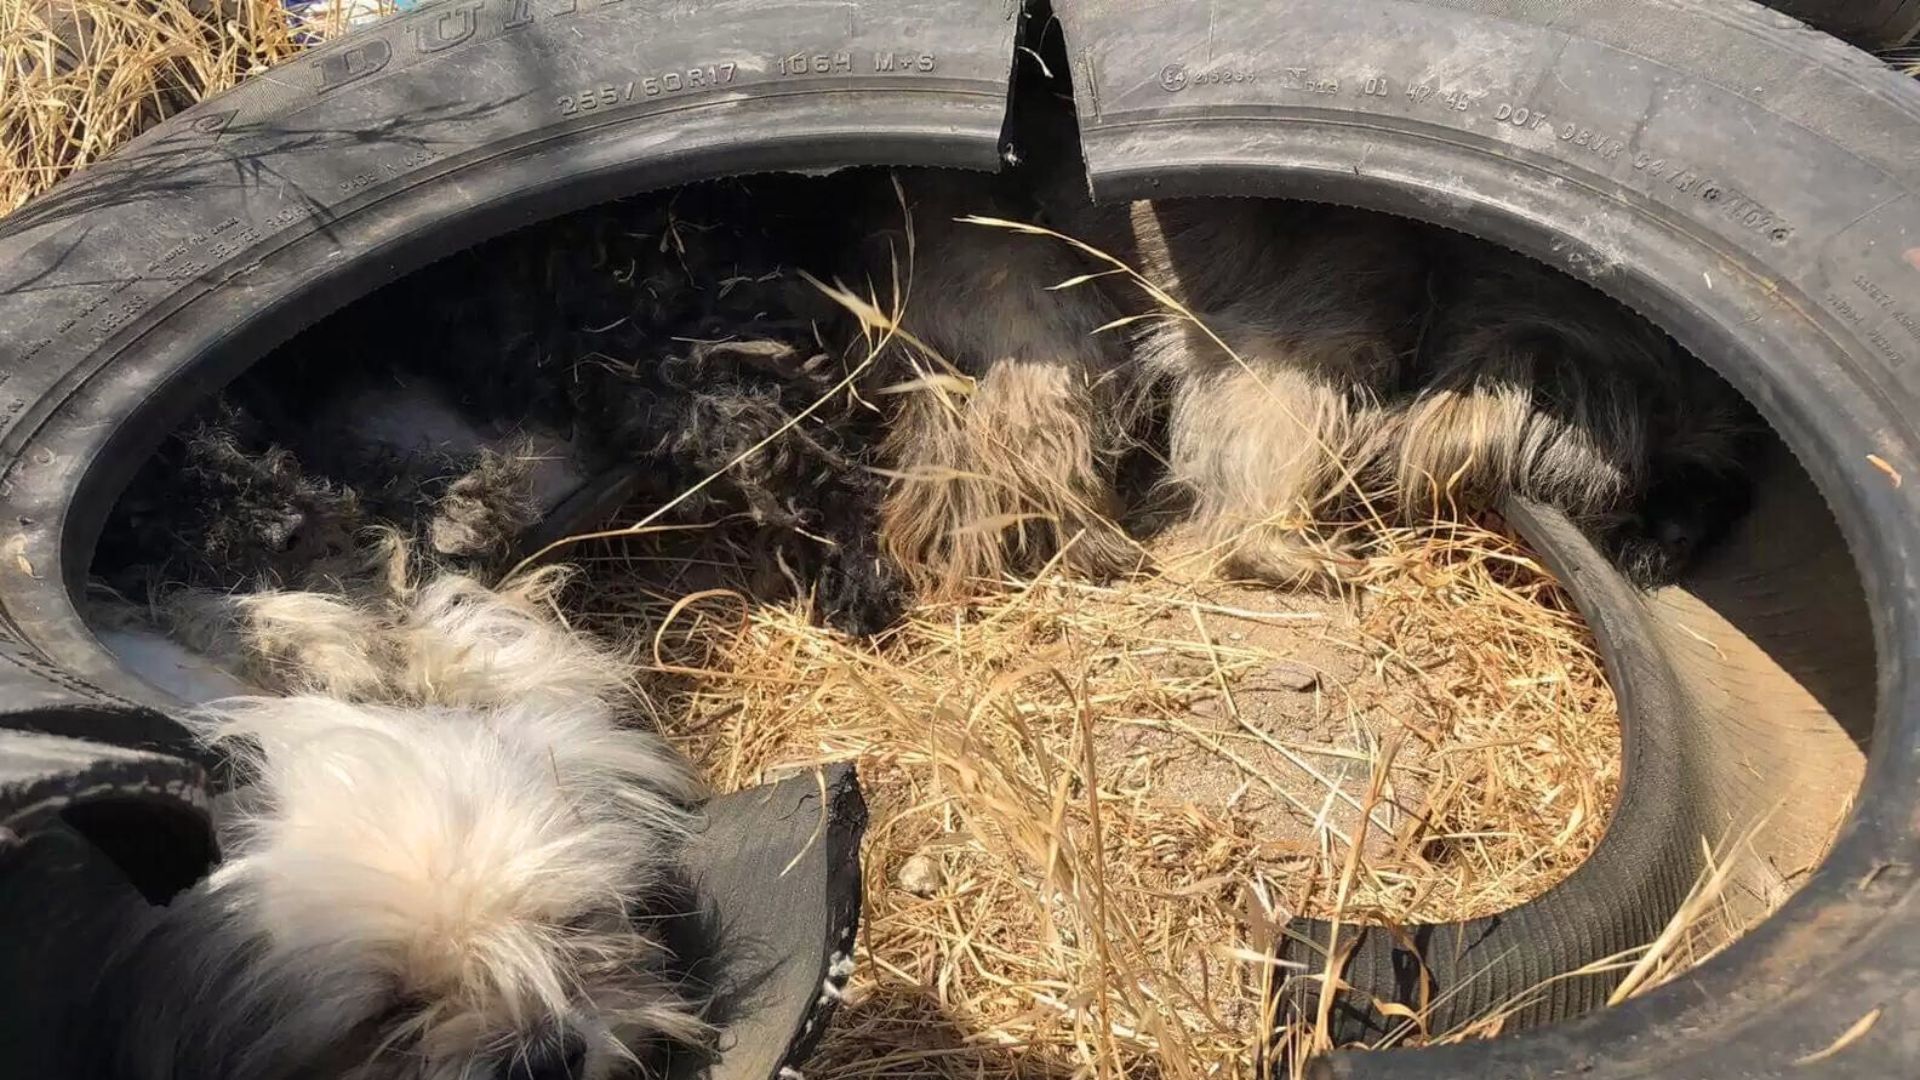 Dog Pack Living In Tire Hiding From The Scorching Sun Finally Gets Noticed